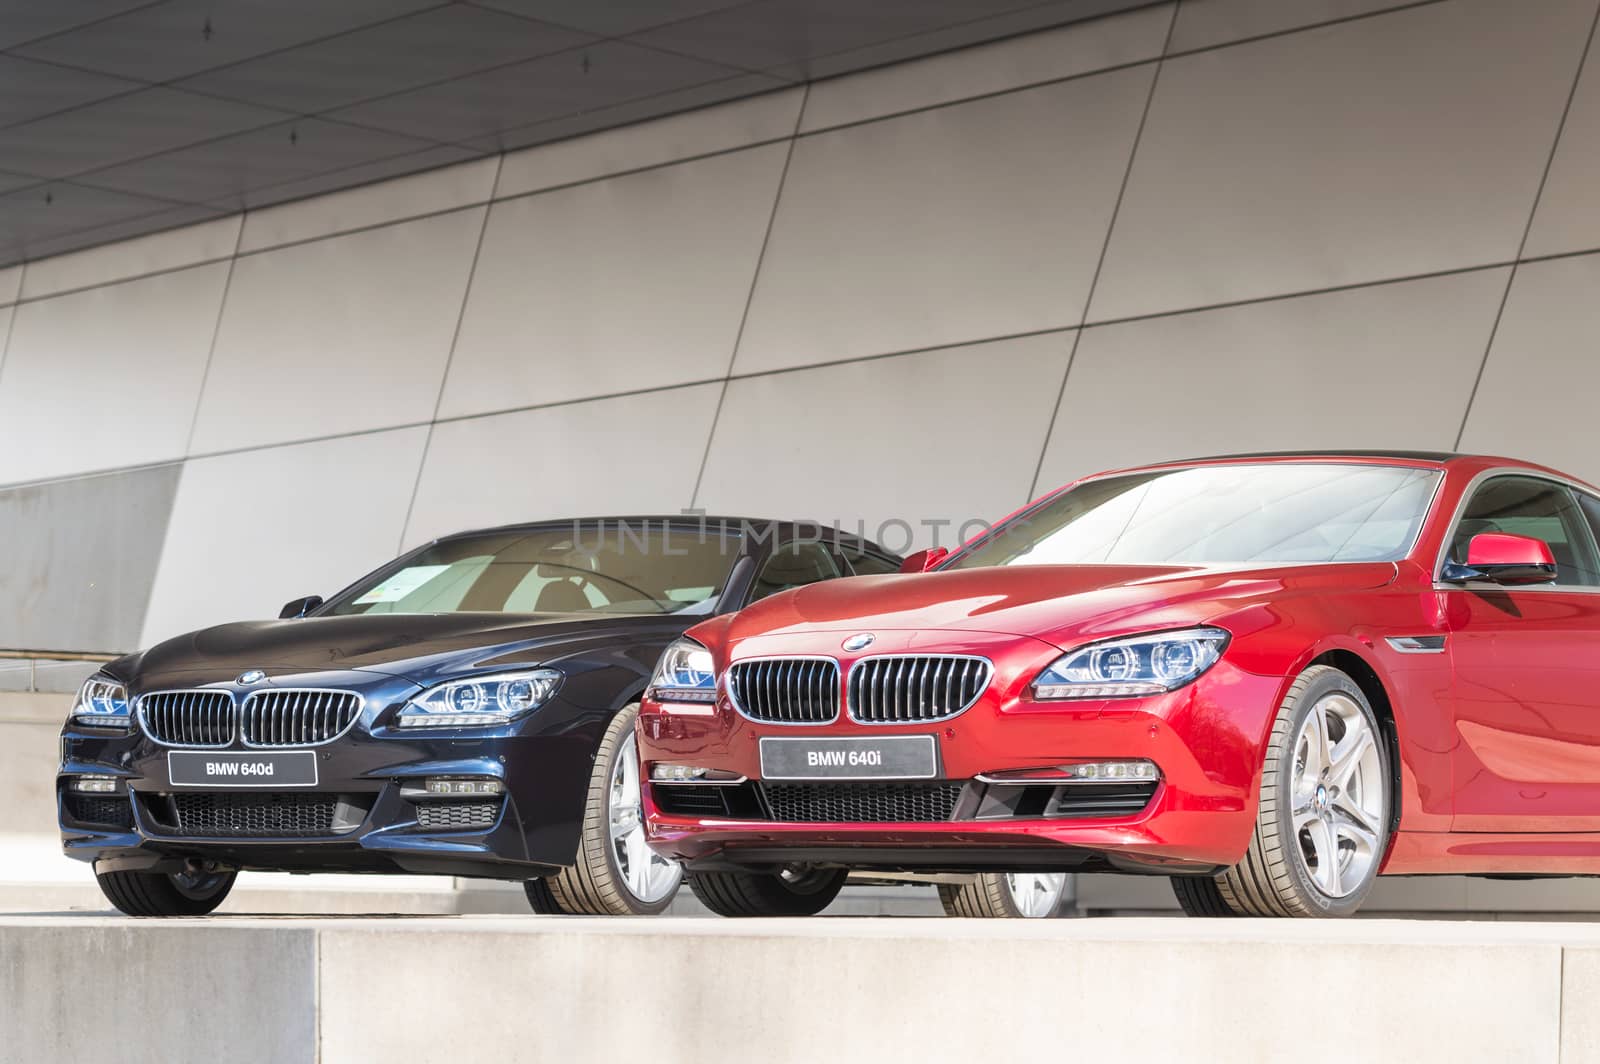 MUNICH, GERMANY - APRIL 12, 2015: New modern BMW 640 model lineup of first class exclusive business sedan cars. Front view of dark blue 640d and red 640i.